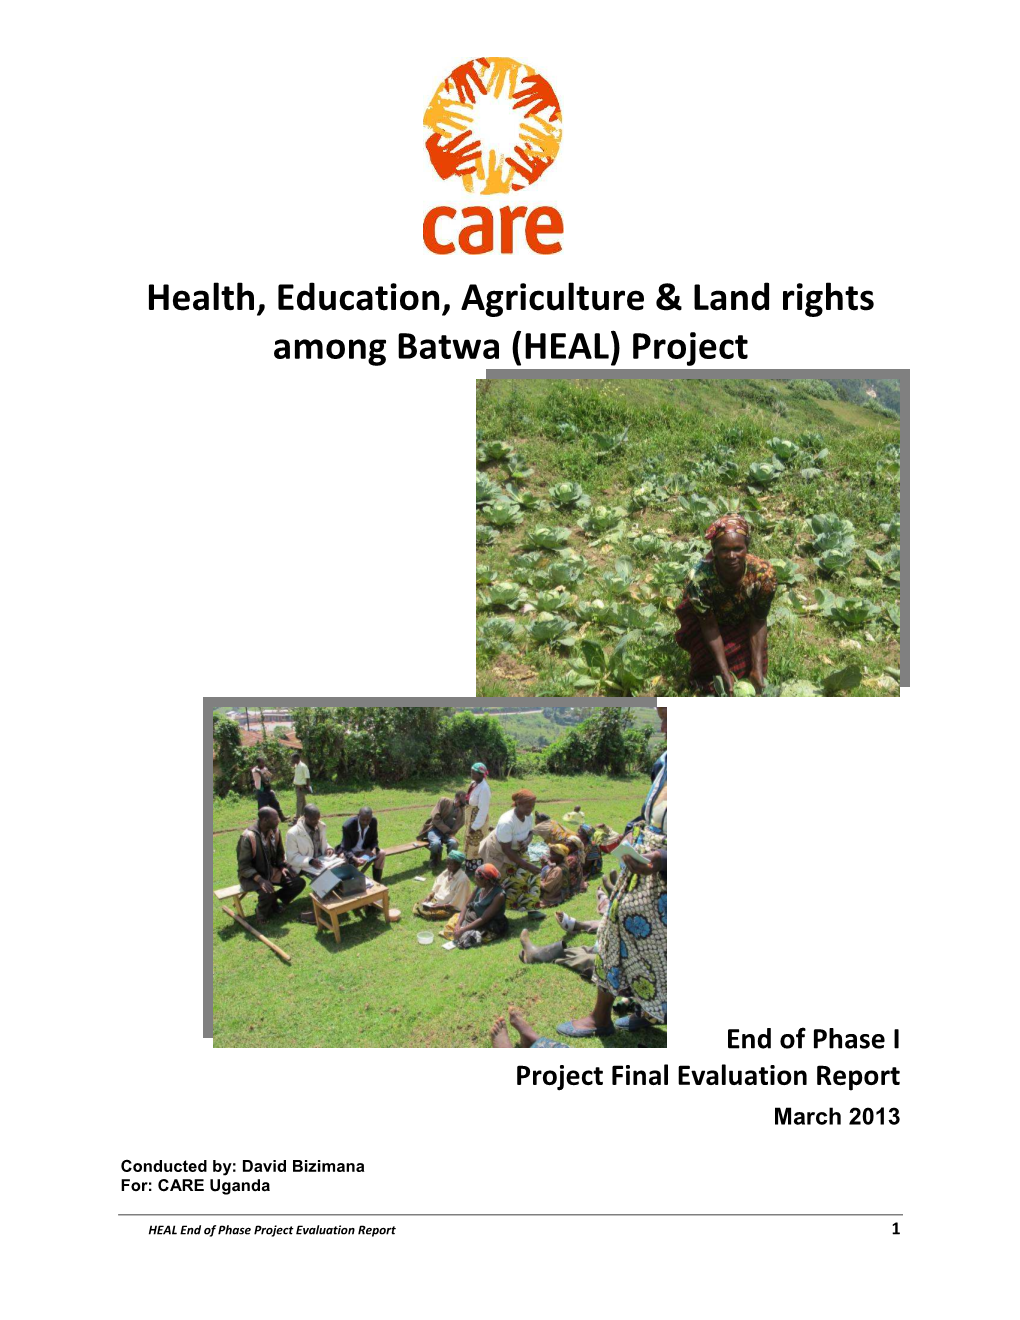 Health, Education, Agriculture & Land Rights Among Batwa (HEAL)